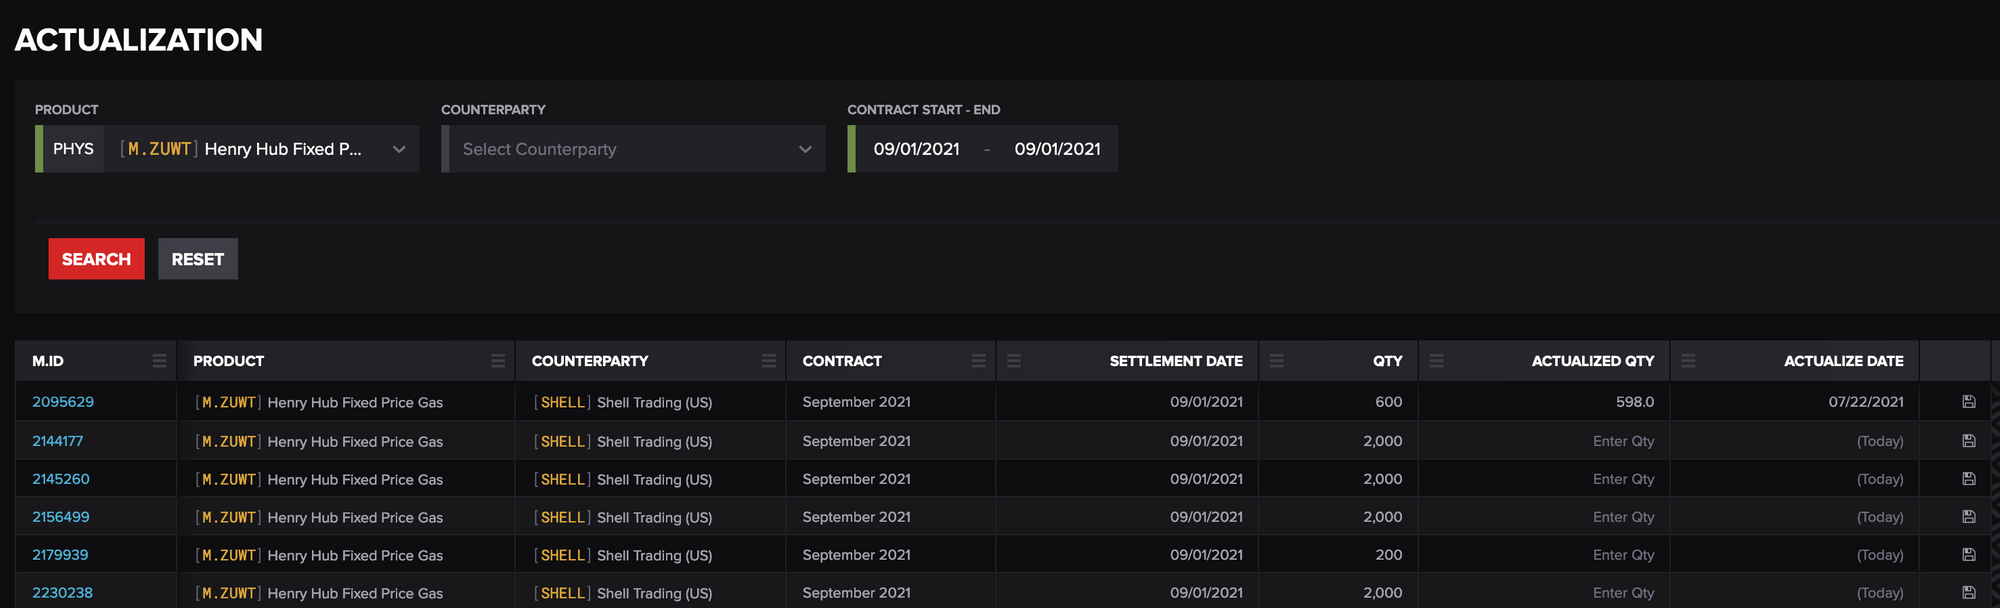 Screenshot of Molecule ETRM/CTRM system Actualization screen for physical commodity management 